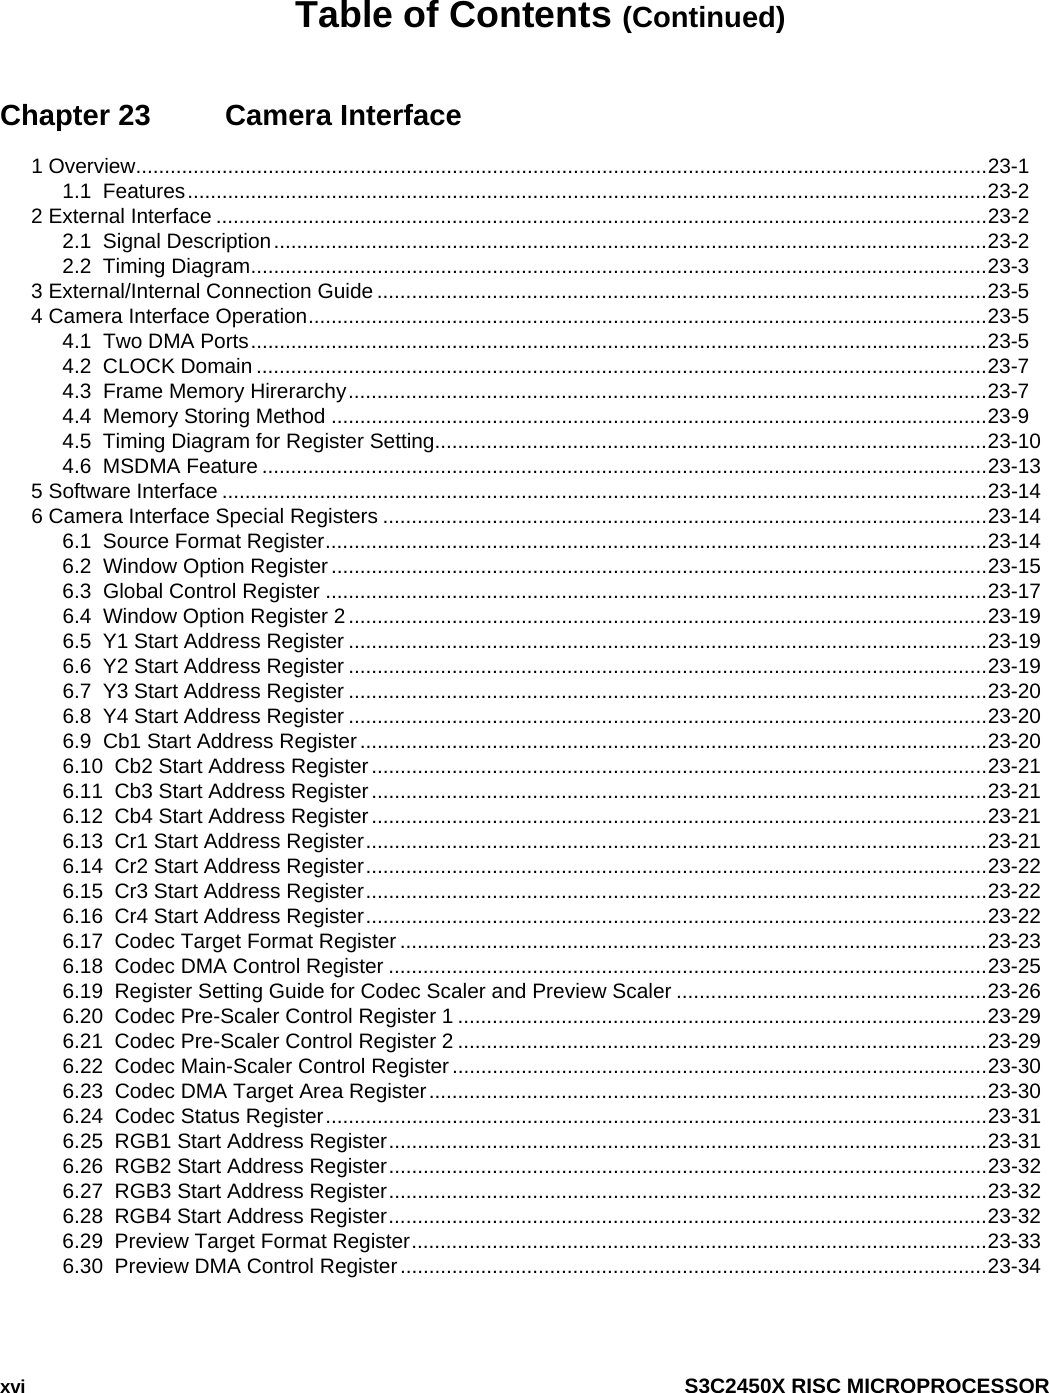  xvi  S3C2450X RISC MICROPROCESSOR Table of Contents (Continued) Chapter 23  Camera Interface 1 Overview....................................................................................................................................................23-1 1.1  Features...........................................................................................................................................23-2 2 External Interface ......................................................................................................................................23-2 2.1  Signal Description............................................................................................................................23-2 2.2  Timing Diagram................................................................................................................................23-3 3 External/Internal Connection Guide ..........................................................................................................23-5 4 Camera Interface Operation......................................................................................................................23-5 4.1  Two DMA Ports................................................................................................................................23-5 4.2  CLOCK Domain ...............................................................................................................................23-7 4.3  Frame Memory Hirerarchy...............................................................................................................23-7 4.4  Memory Storing Method ..................................................................................................................23-9 4.5  Timing Diagram for Register Setting................................................................................................23-10 4.6  MSDMA Feature ..............................................................................................................................23-13 5 Software Interface .....................................................................................................................................23-14 6 Camera Interface Special Registers .........................................................................................................23-14 6.1  Source Format Register...................................................................................................................23-14 6.2  Window Option Register ..................................................................................................................23-15 6.3  Global Control Register ...................................................................................................................23-17 6.4  Window Option Register 2...............................................................................................................23-19 6.5  Y1 Start Address Register ...............................................................................................................23-19 6.6  Y2 Start Address Register ...............................................................................................................23-19 6.7  Y3 Start Address Register ...............................................................................................................23-20 6.8  Y4 Start Address Register ...............................................................................................................23-20 6.9  Cb1 Start Address Register.............................................................................................................23-20 6.10  Cb2 Start Address Register...........................................................................................................23-21 6.11  Cb3 Start Address Register...........................................................................................................23-21 6.12  Cb4 Start Address Register...........................................................................................................23-21 6.13  Cr1 Start Address Register............................................................................................................23-21 6.14  Cr2 Start Address Register............................................................................................................23-22 6.15  Cr3 Start Address Register............................................................................................................23-22 6.16  Cr4 Start Address Register............................................................................................................23-22 6.17  Codec Target Format Register ......................................................................................................23-23 6.18  Codec DMA Control Register ........................................................................................................23-25 6.19  Register Setting Guide for Codec Scaler and Preview Scaler ......................................................23-26 6.20  Codec Pre-Scaler Control Register 1 ............................................................................................23-29 6.21  Codec Pre-Scaler Control Register 2 ............................................................................................23-29 6.22  Codec Main-Scaler Control Register.............................................................................................23-30 6.23  Codec DMA Target Area Register.................................................................................................23-30 6.24  Codec Status Register...................................................................................................................23-31 6.25  RGB1 Start Address Register........................................................................................................23-31 6.26  RGB2 Start Address Register........................................................................................................23-32 6.27  RGB3 Start Address Register........................................................................................................23-32 6.28  RGB4 Start Address Register........................................................................................................23-32 6.29  Preview Target Format Register....................................................................................................23-33 6.30  Preview DMA Control Register......................................................................................................23-34 